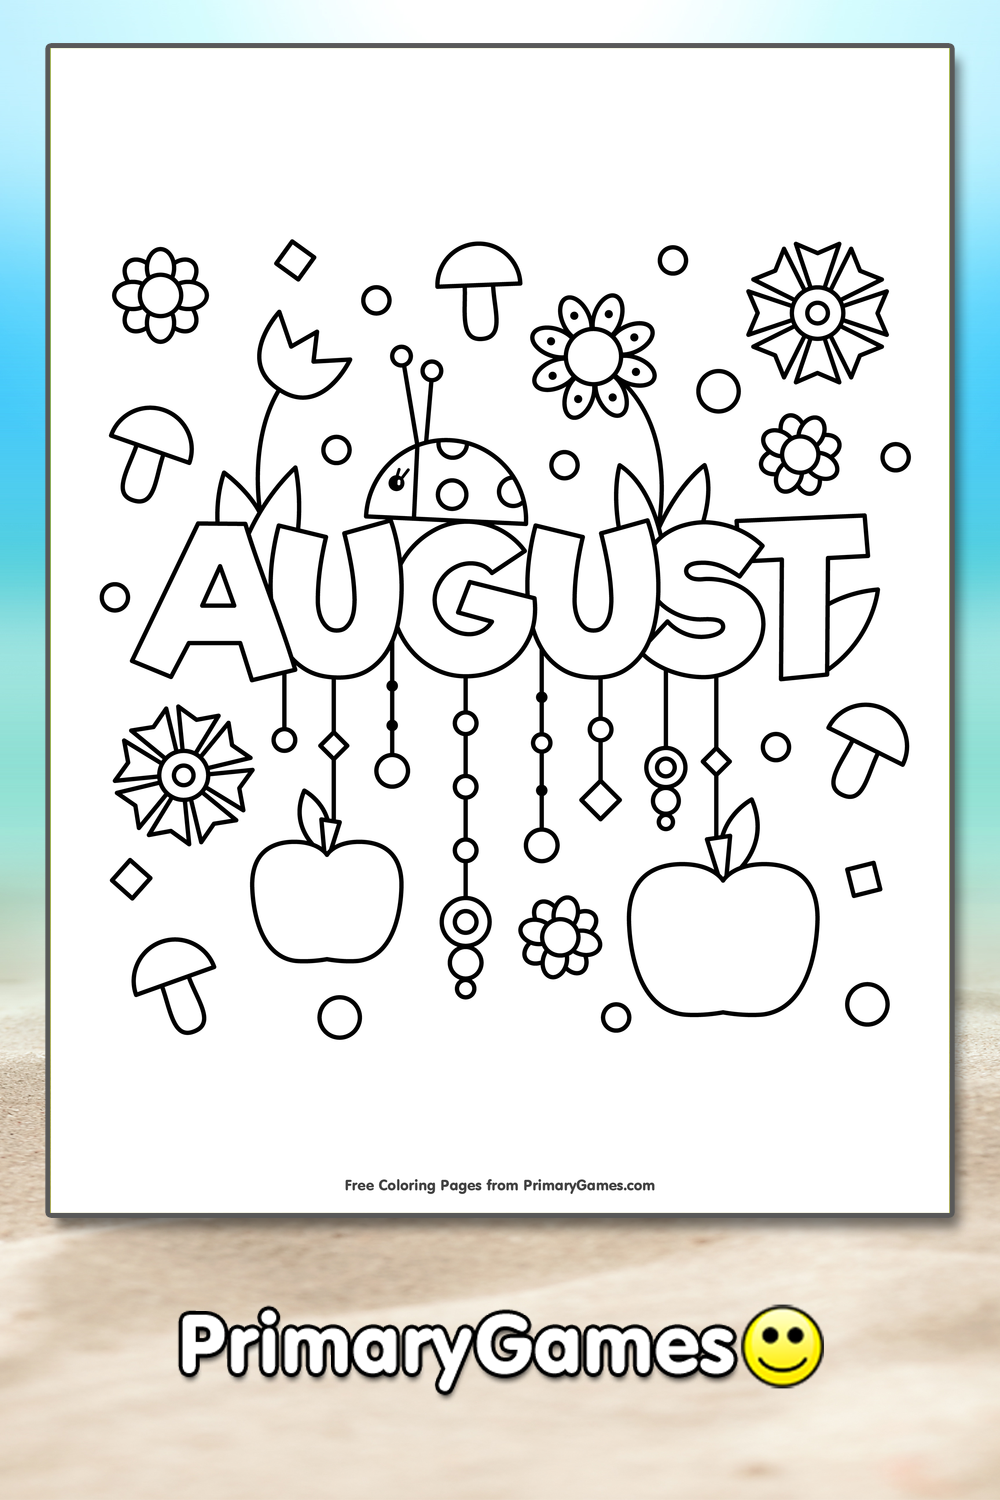 August Coloring Page • FREE Printable PDF from PrimaryGames